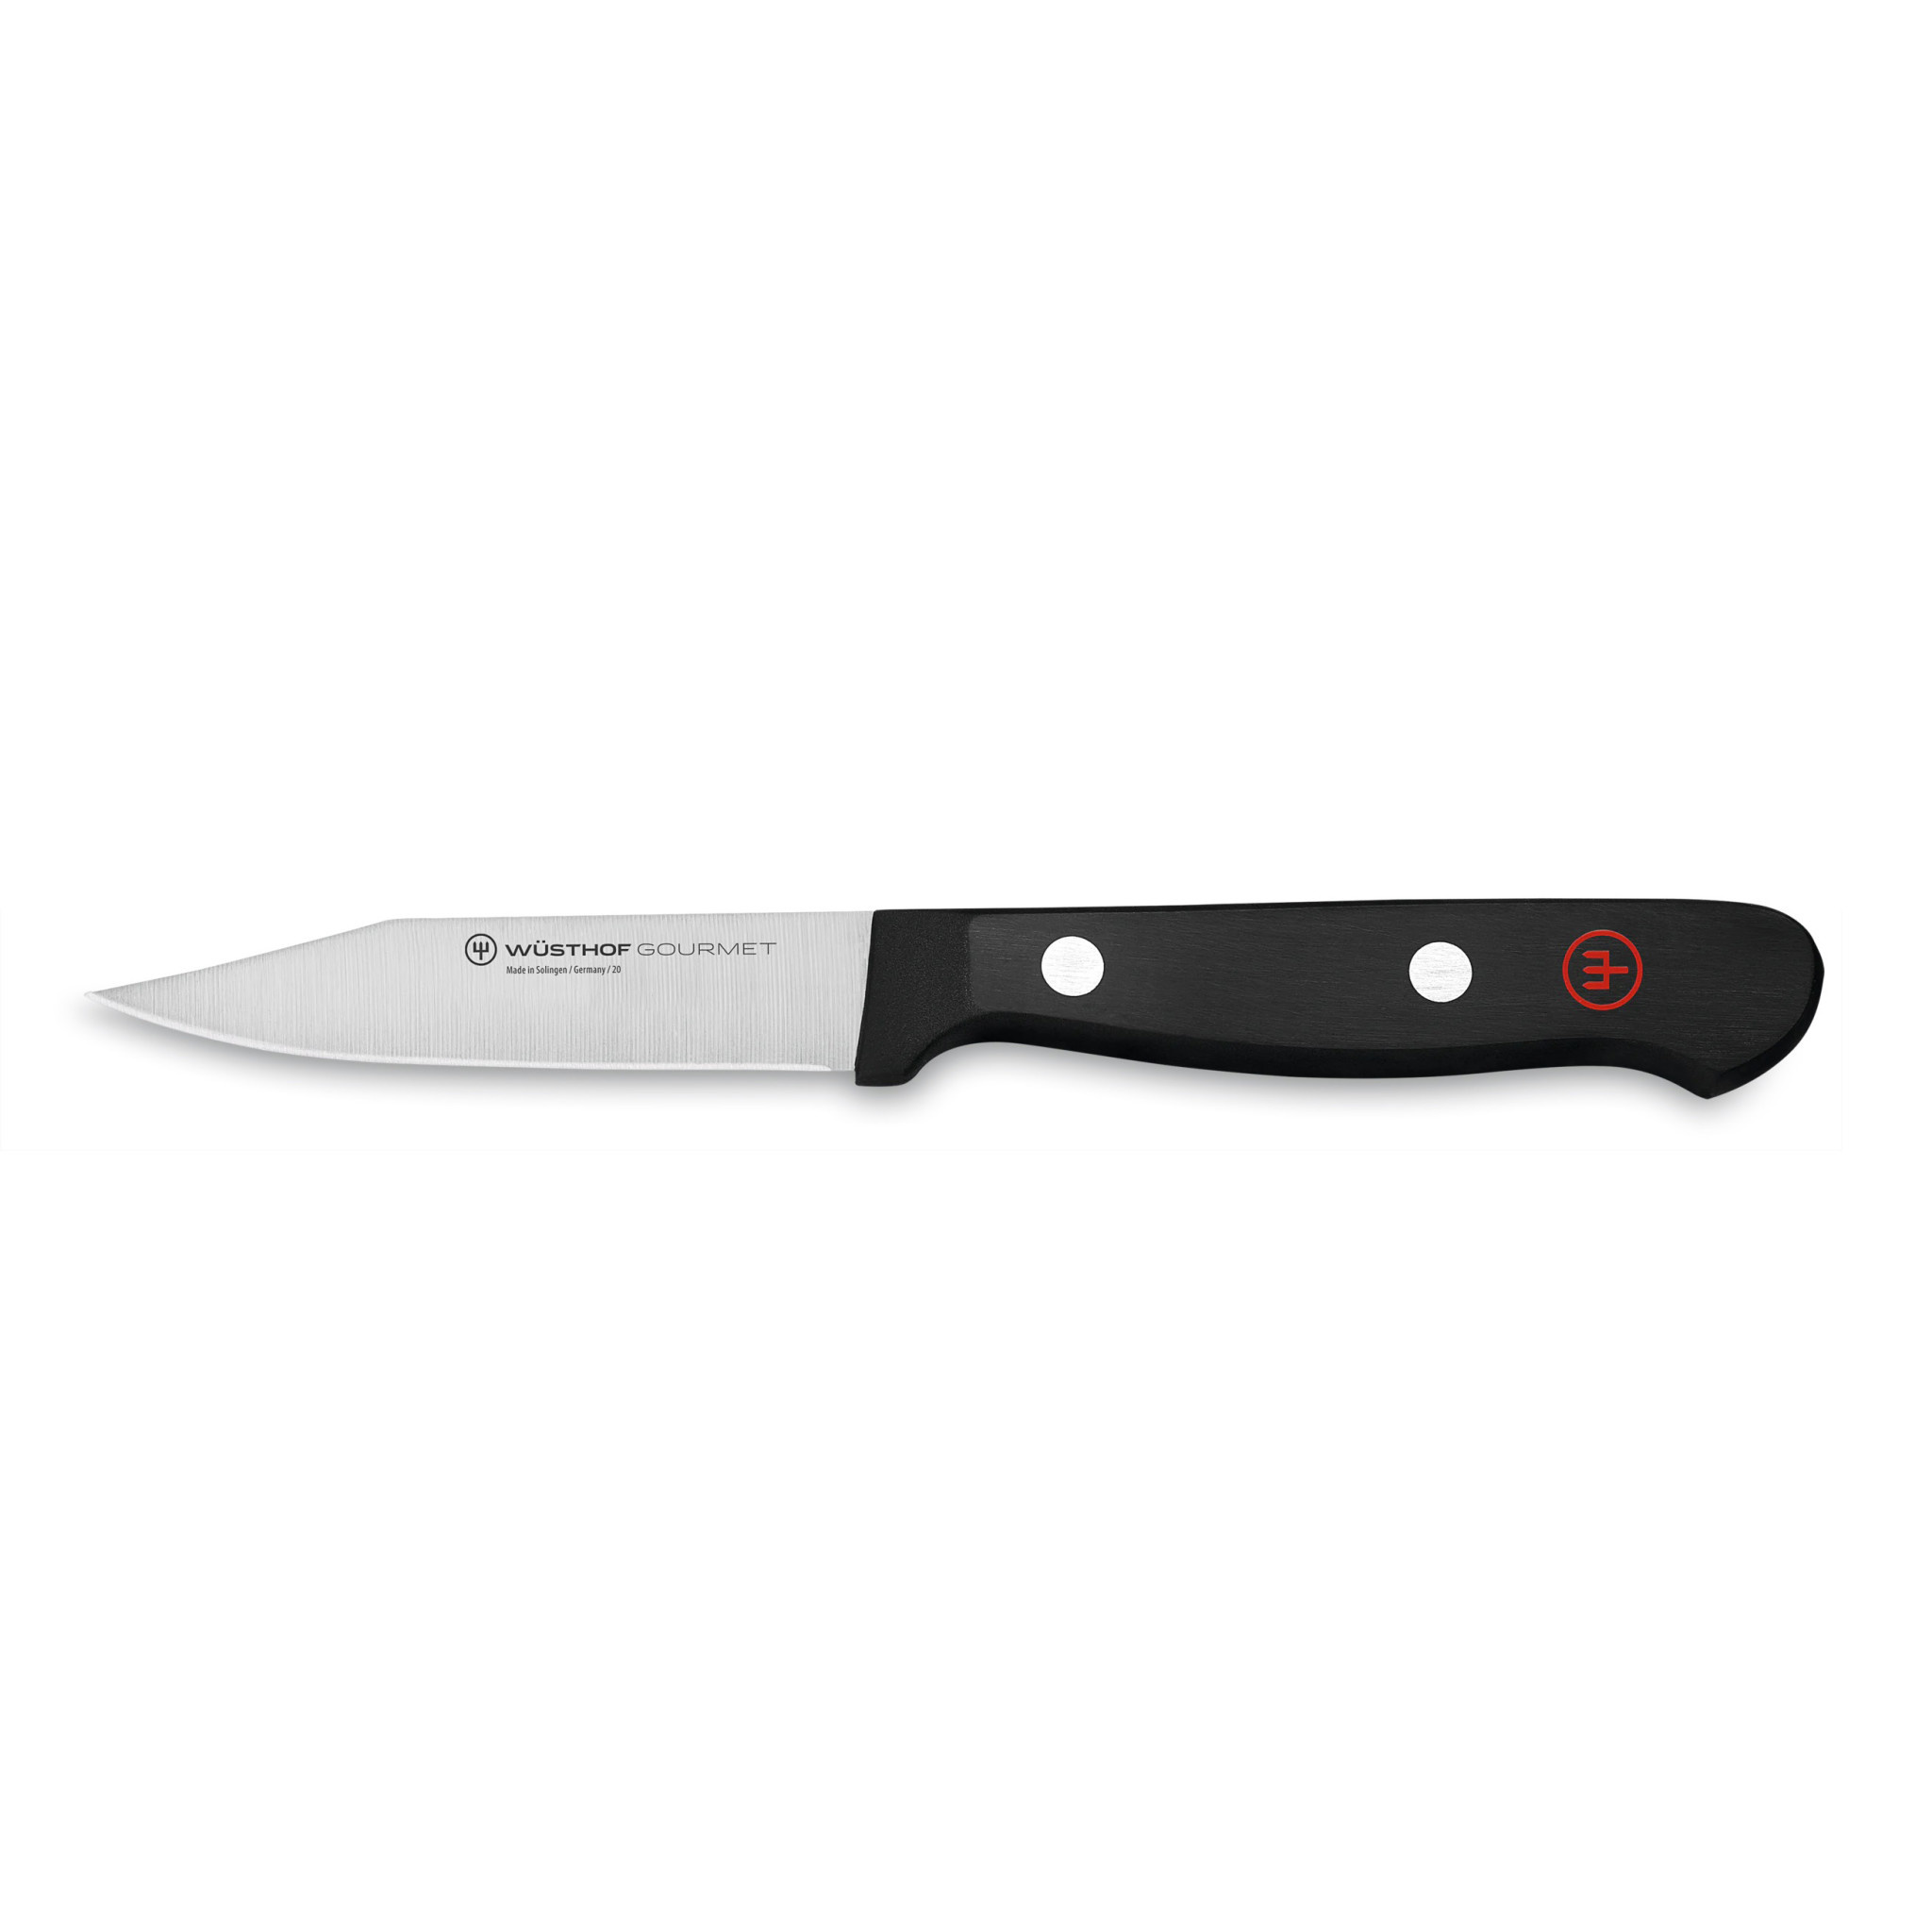 Chefs Paring Knife 3